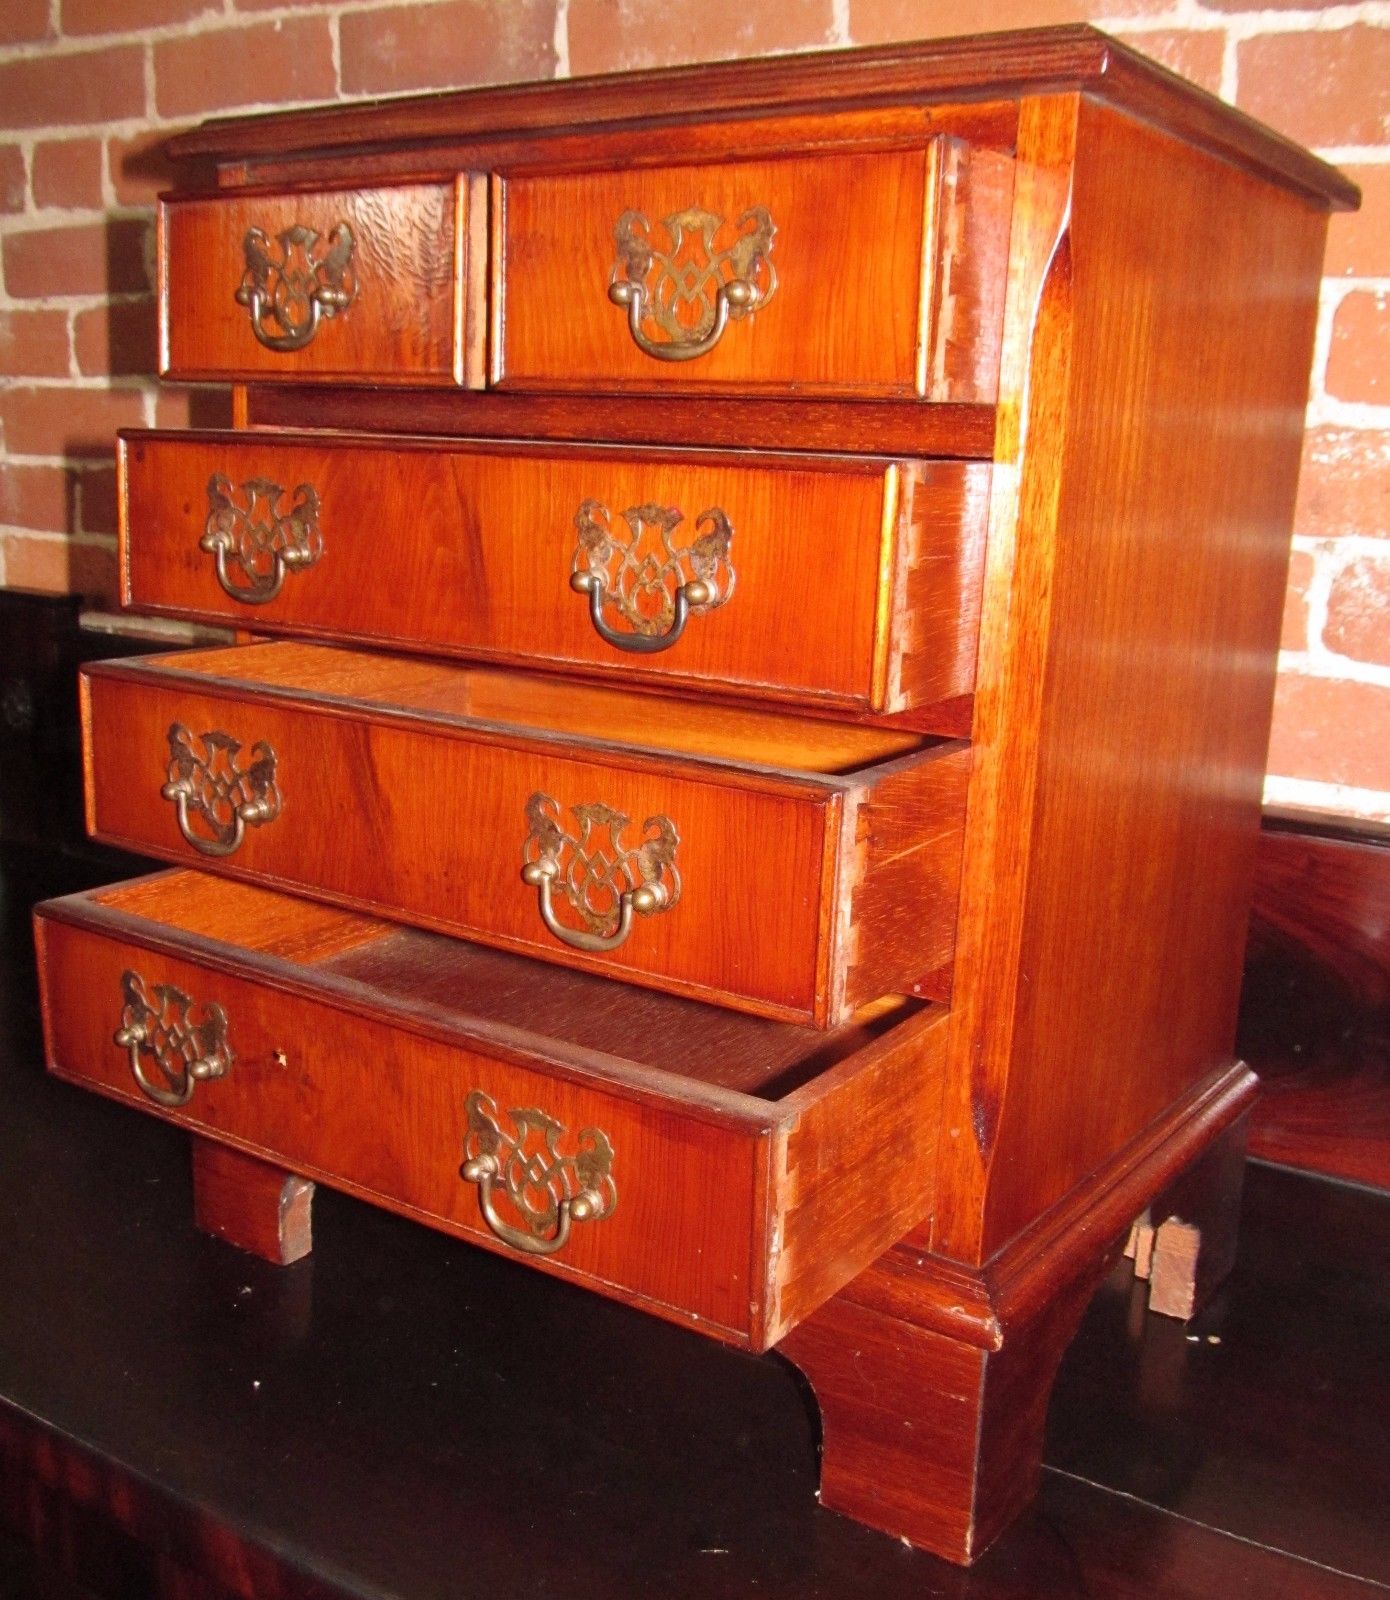 FINE MAHOGANY CHIPPENDALE STYLED CROSS BAND INLAID "MINI CHEST"-FINE BRASSES